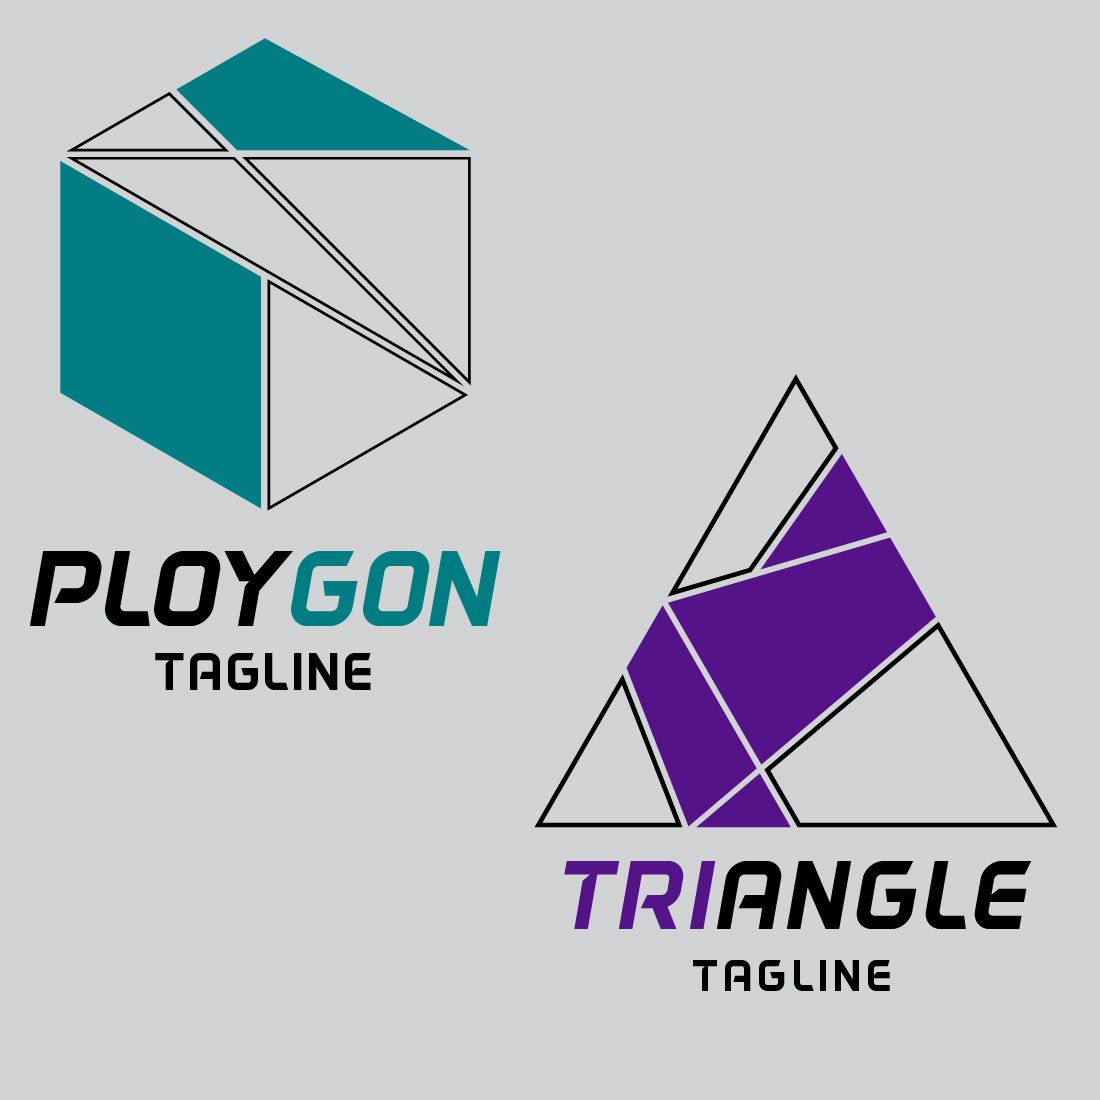 2 Geometrical Style Logo Template For $12 Only cover image.